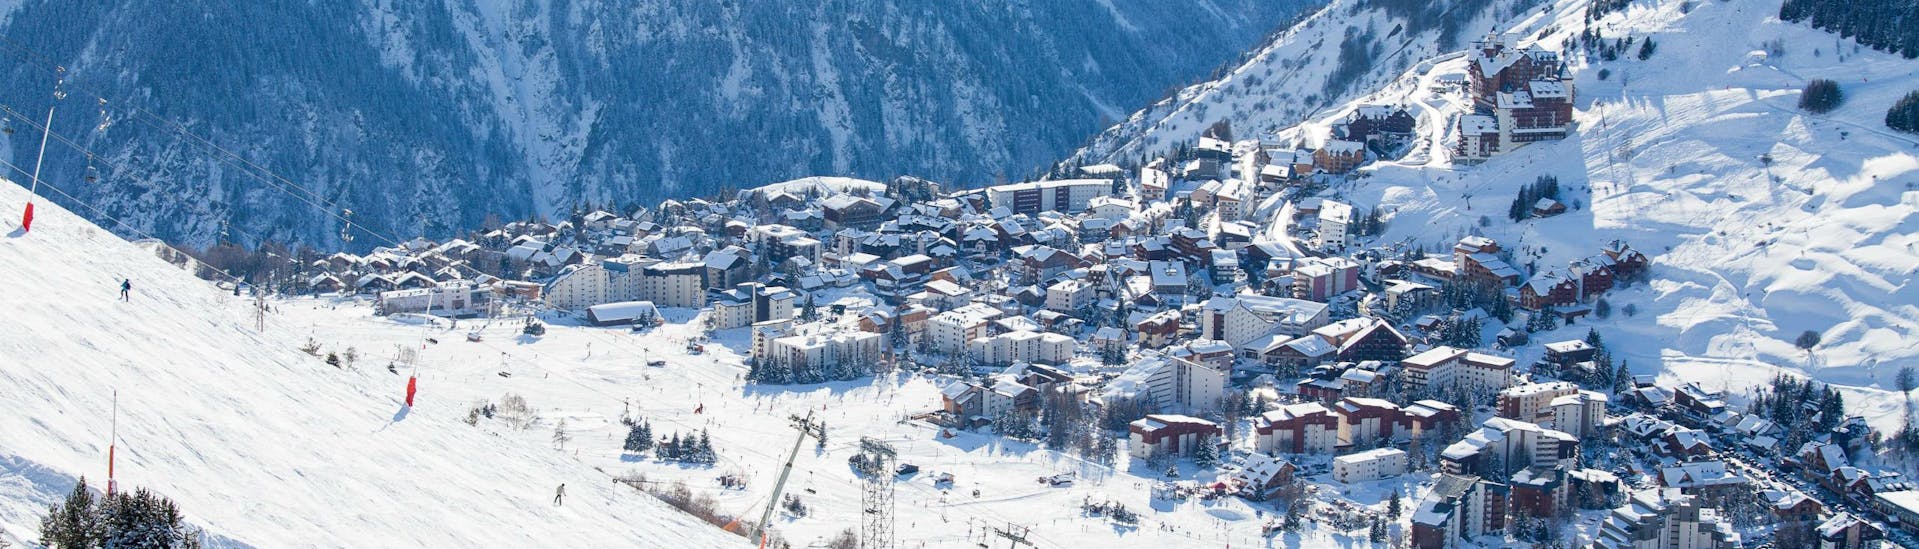 An image of France's second oldest ski resort Les Deux Alpes, where local ski schools offer ski lessons for those who want to learn to ski.